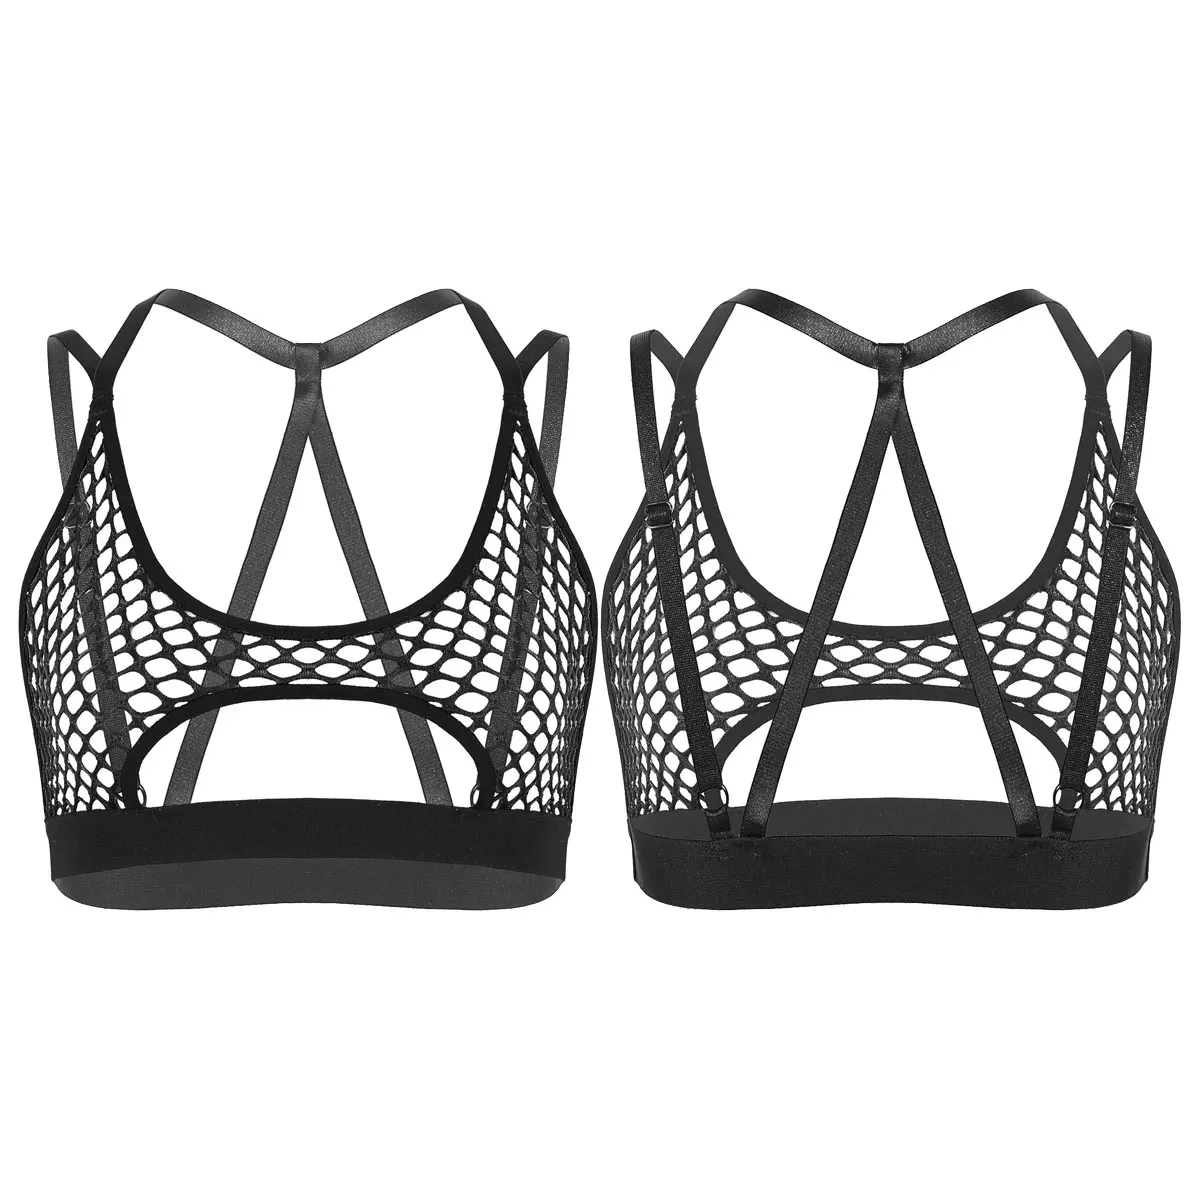 

Womens Hollow Out Fishnet Vest Sexy Crop Tops Halter Neck Elastic Crisscross Back Cutout Underboob Tank tops Club Party Costumes